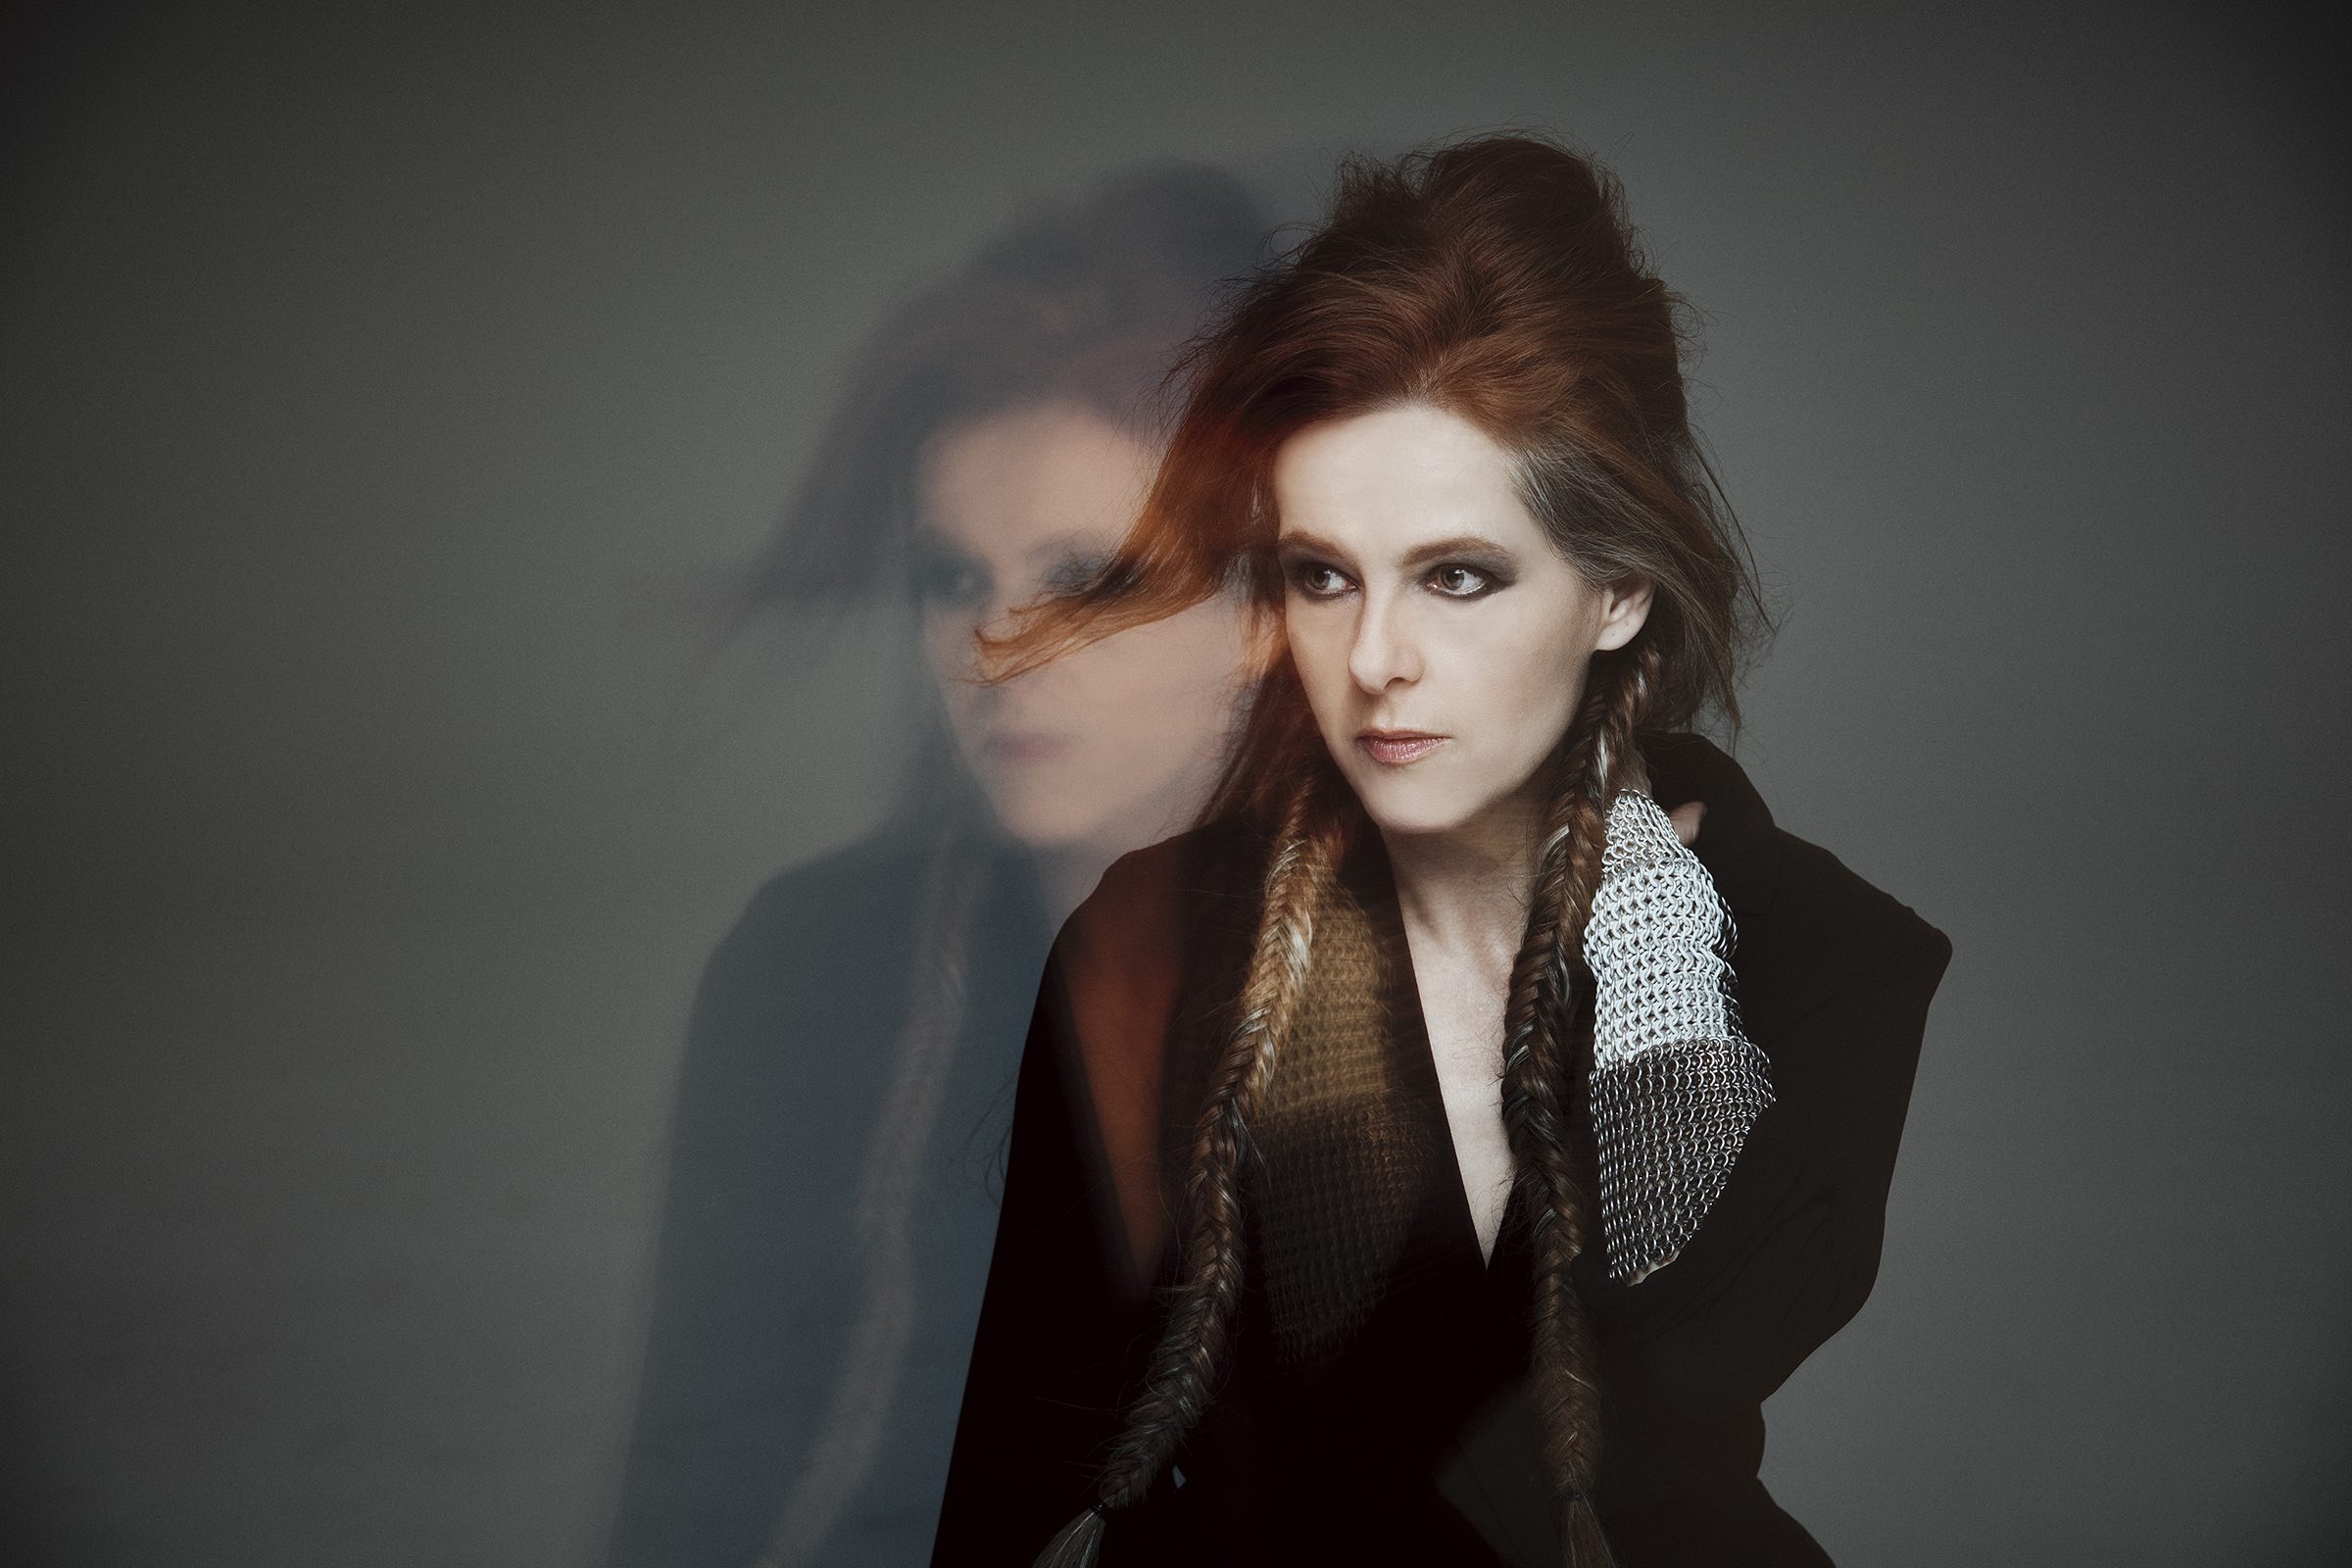 Neko Case w/ Thao (of the Get Down Stay Down)